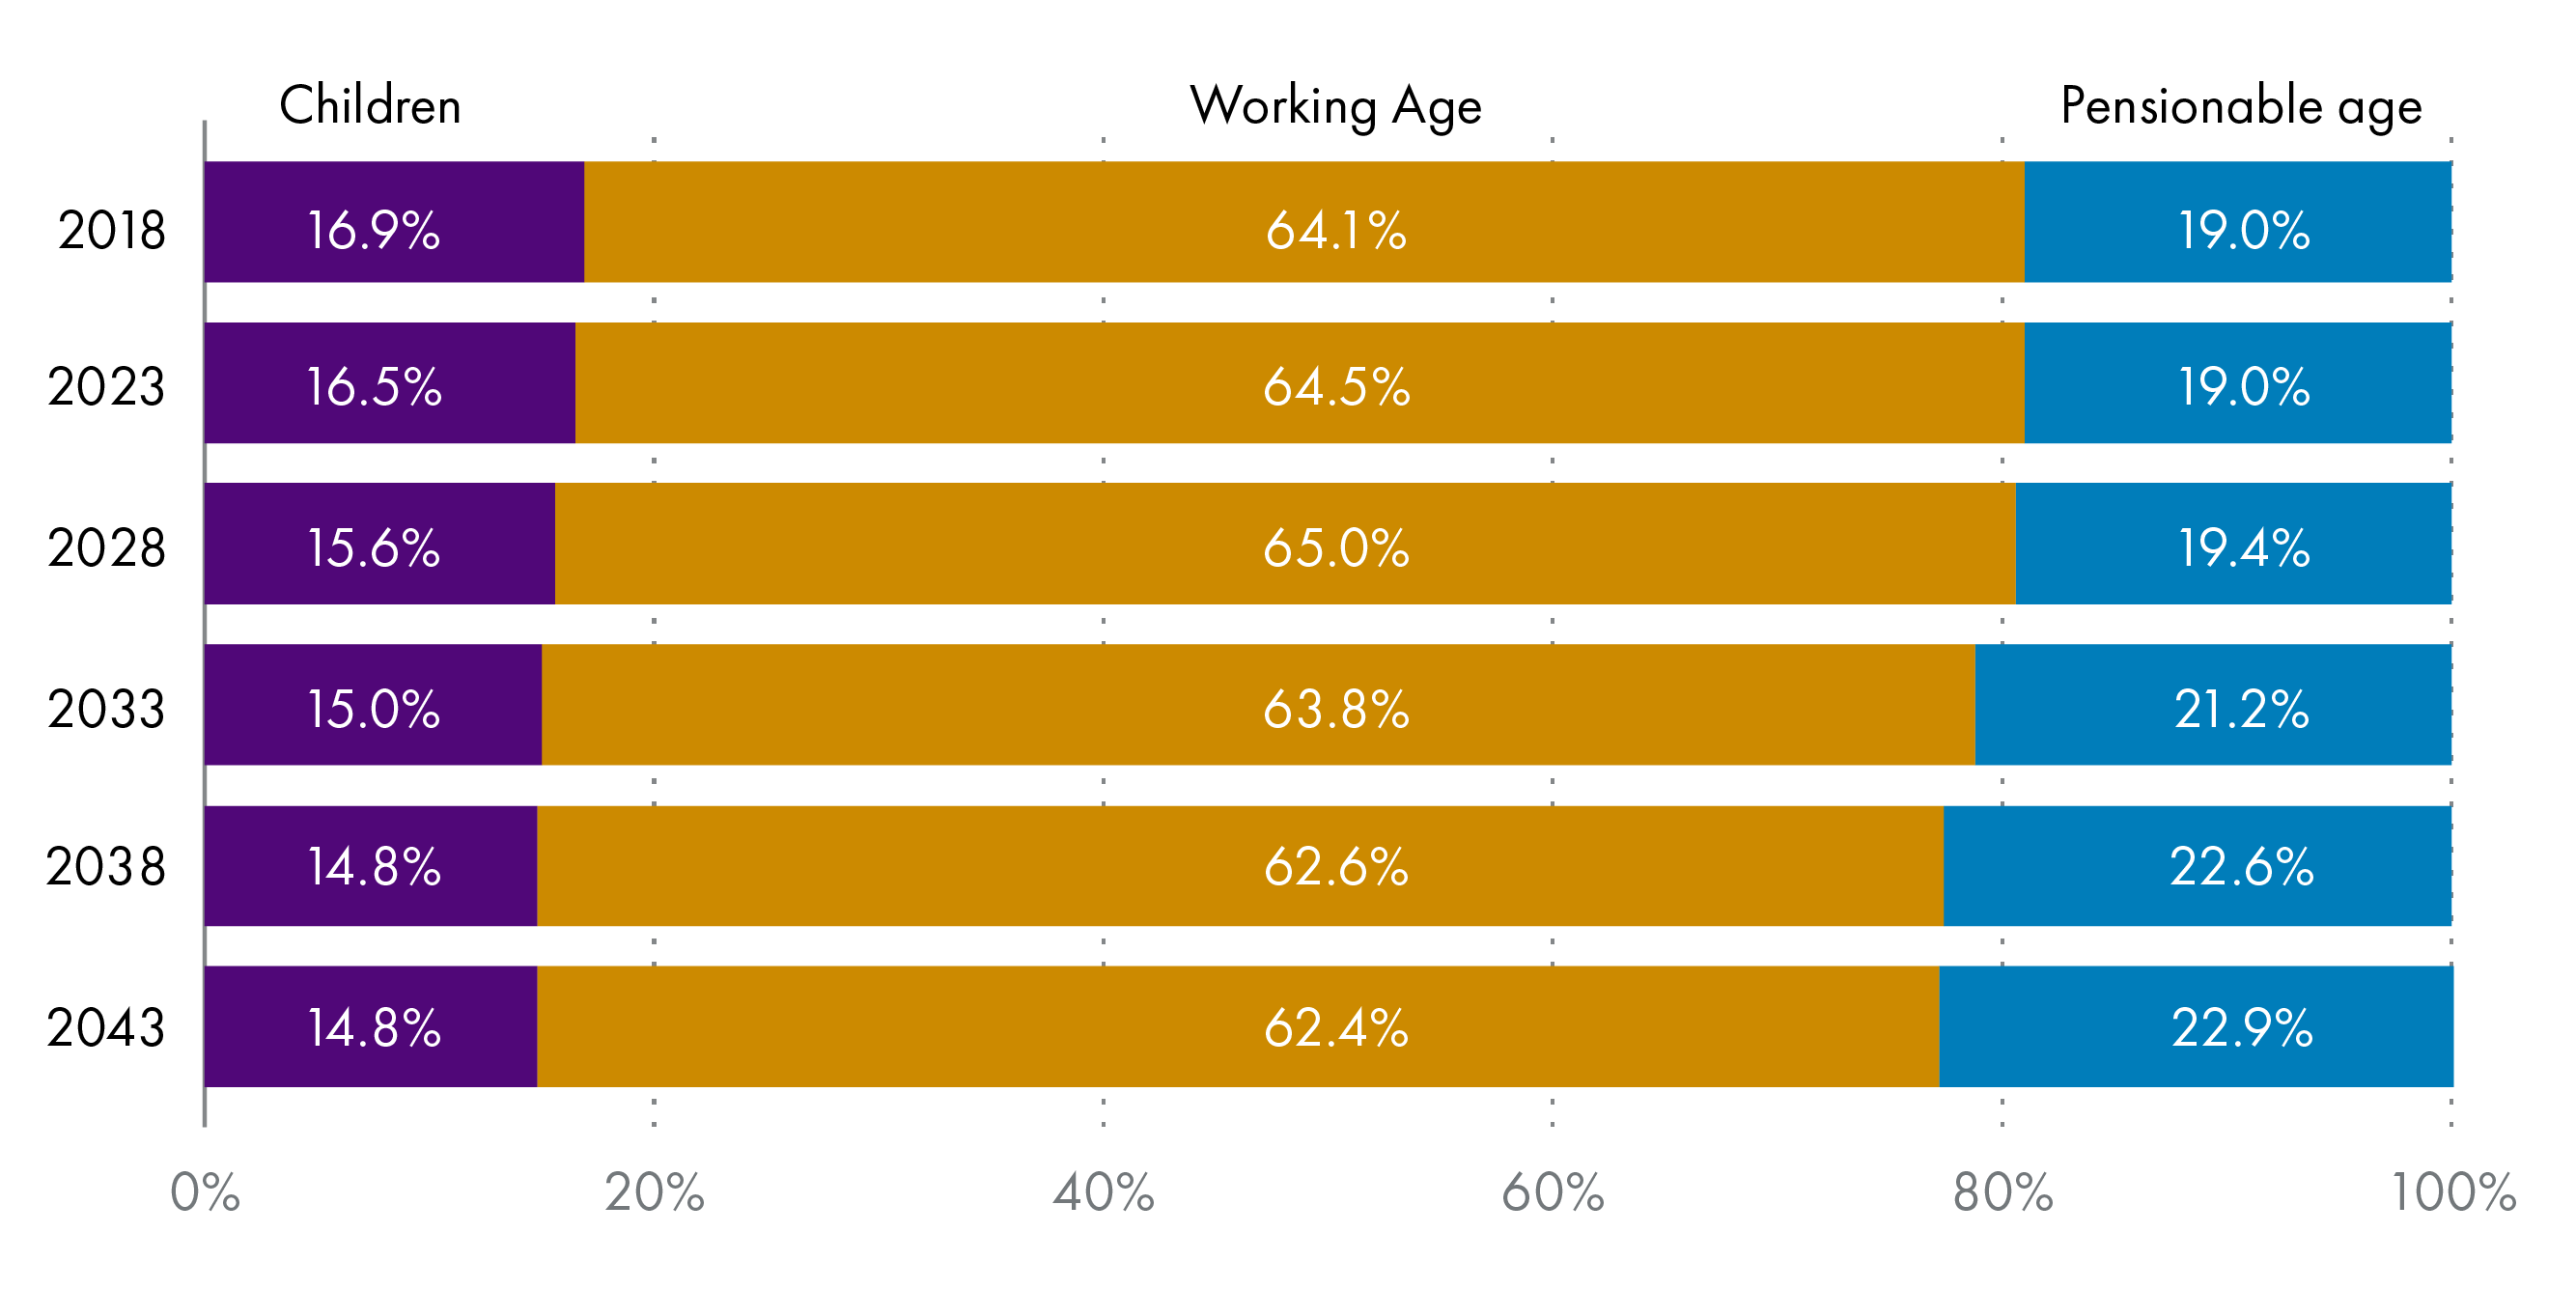 Note the reduction in children(i.e. birth rate) and working age adults and the near 4 percentage point rise in people of pensionable age.